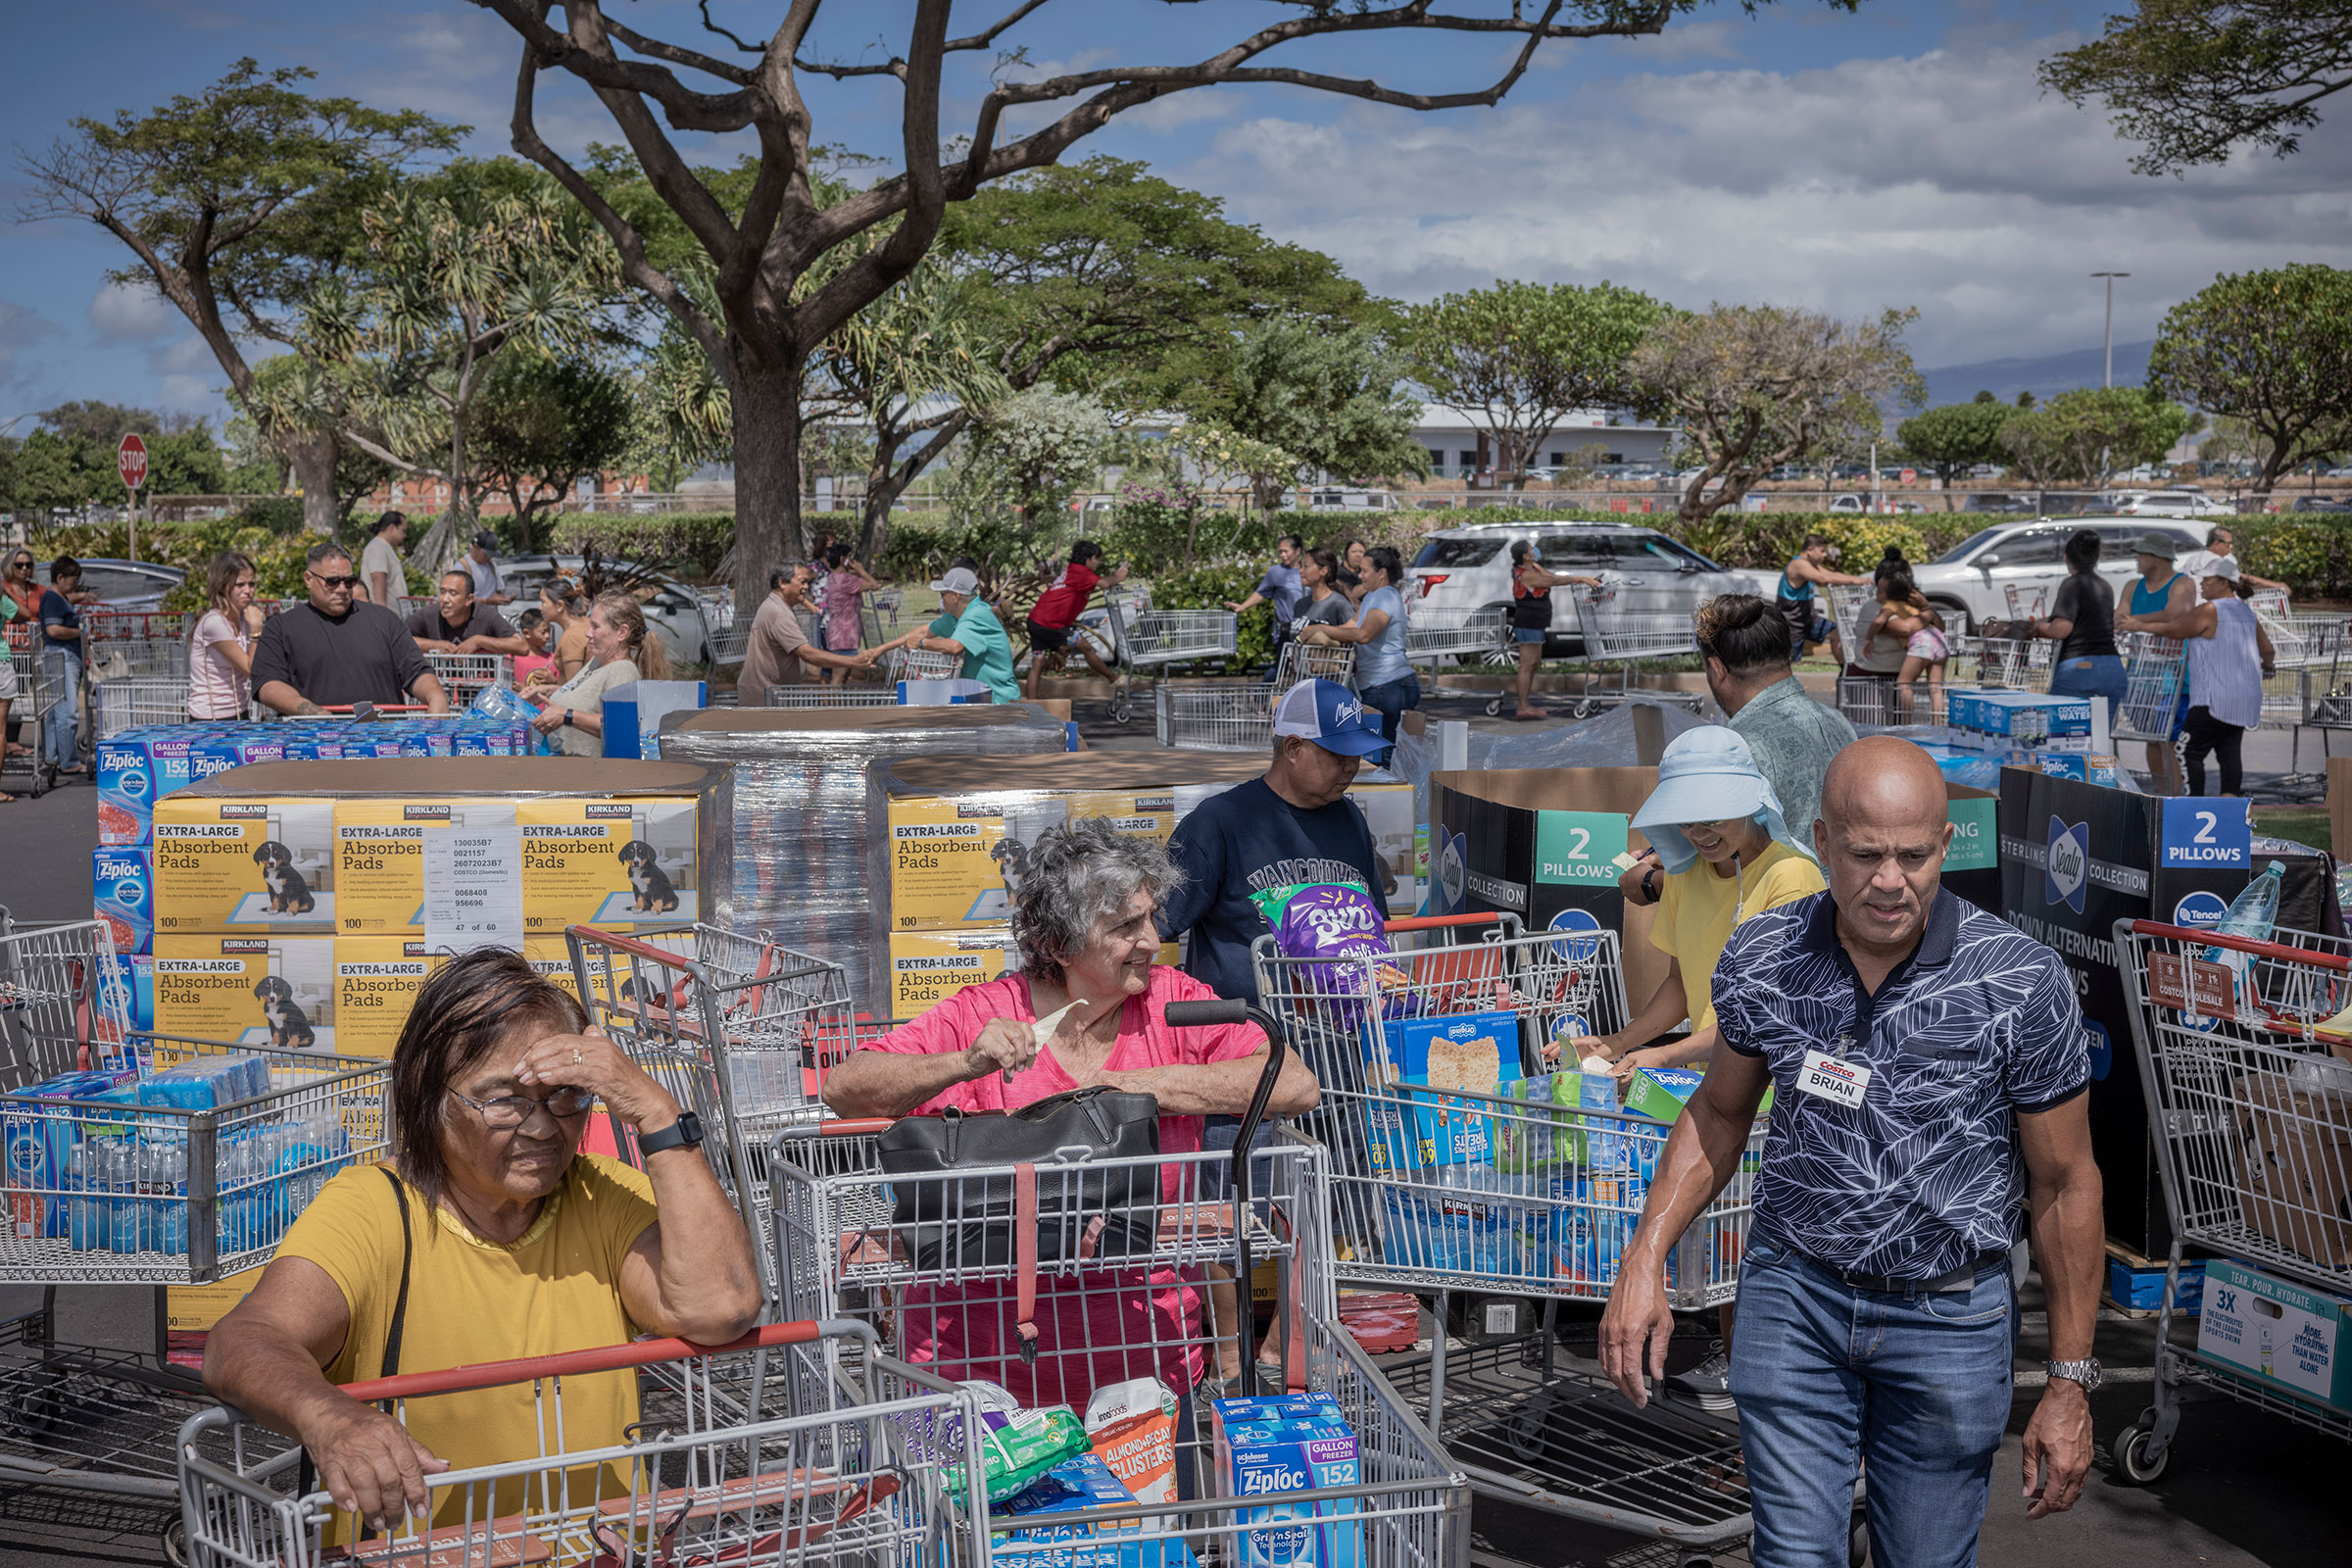 Maui residents line up to get free supplies at a Costco in Kahului on Aug. 14. (David Butow for TIME)